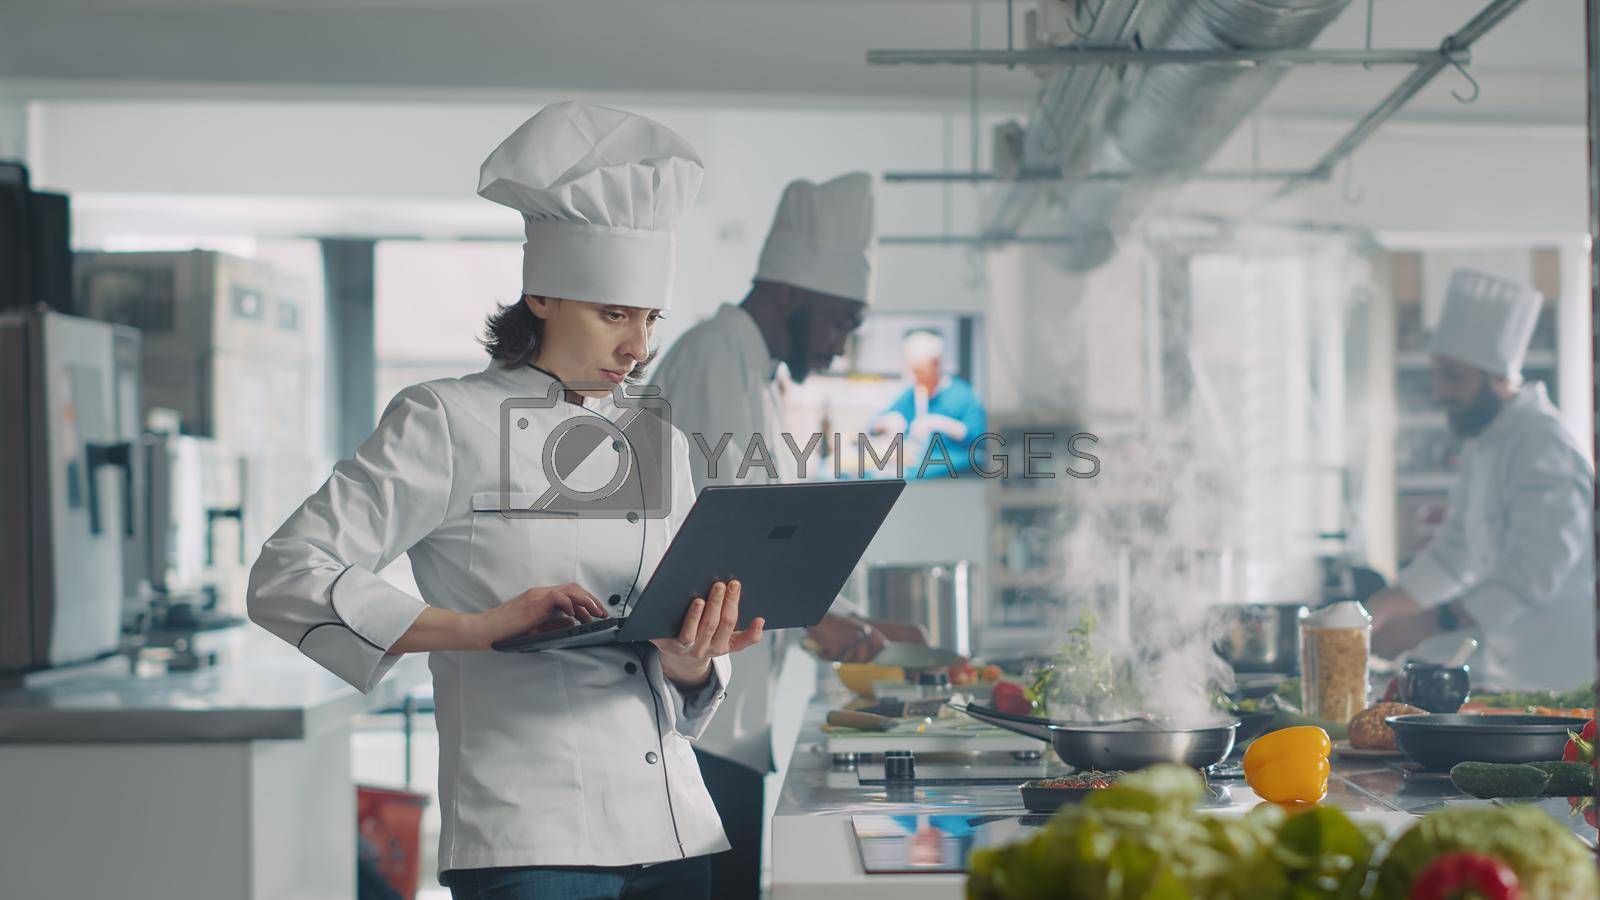 Female cook looking at laptop screen to follow food recipe, making professional gourmet dish. Woman in uniform cooking gastronomy meal with organic ingredients, using computer in kitchen.